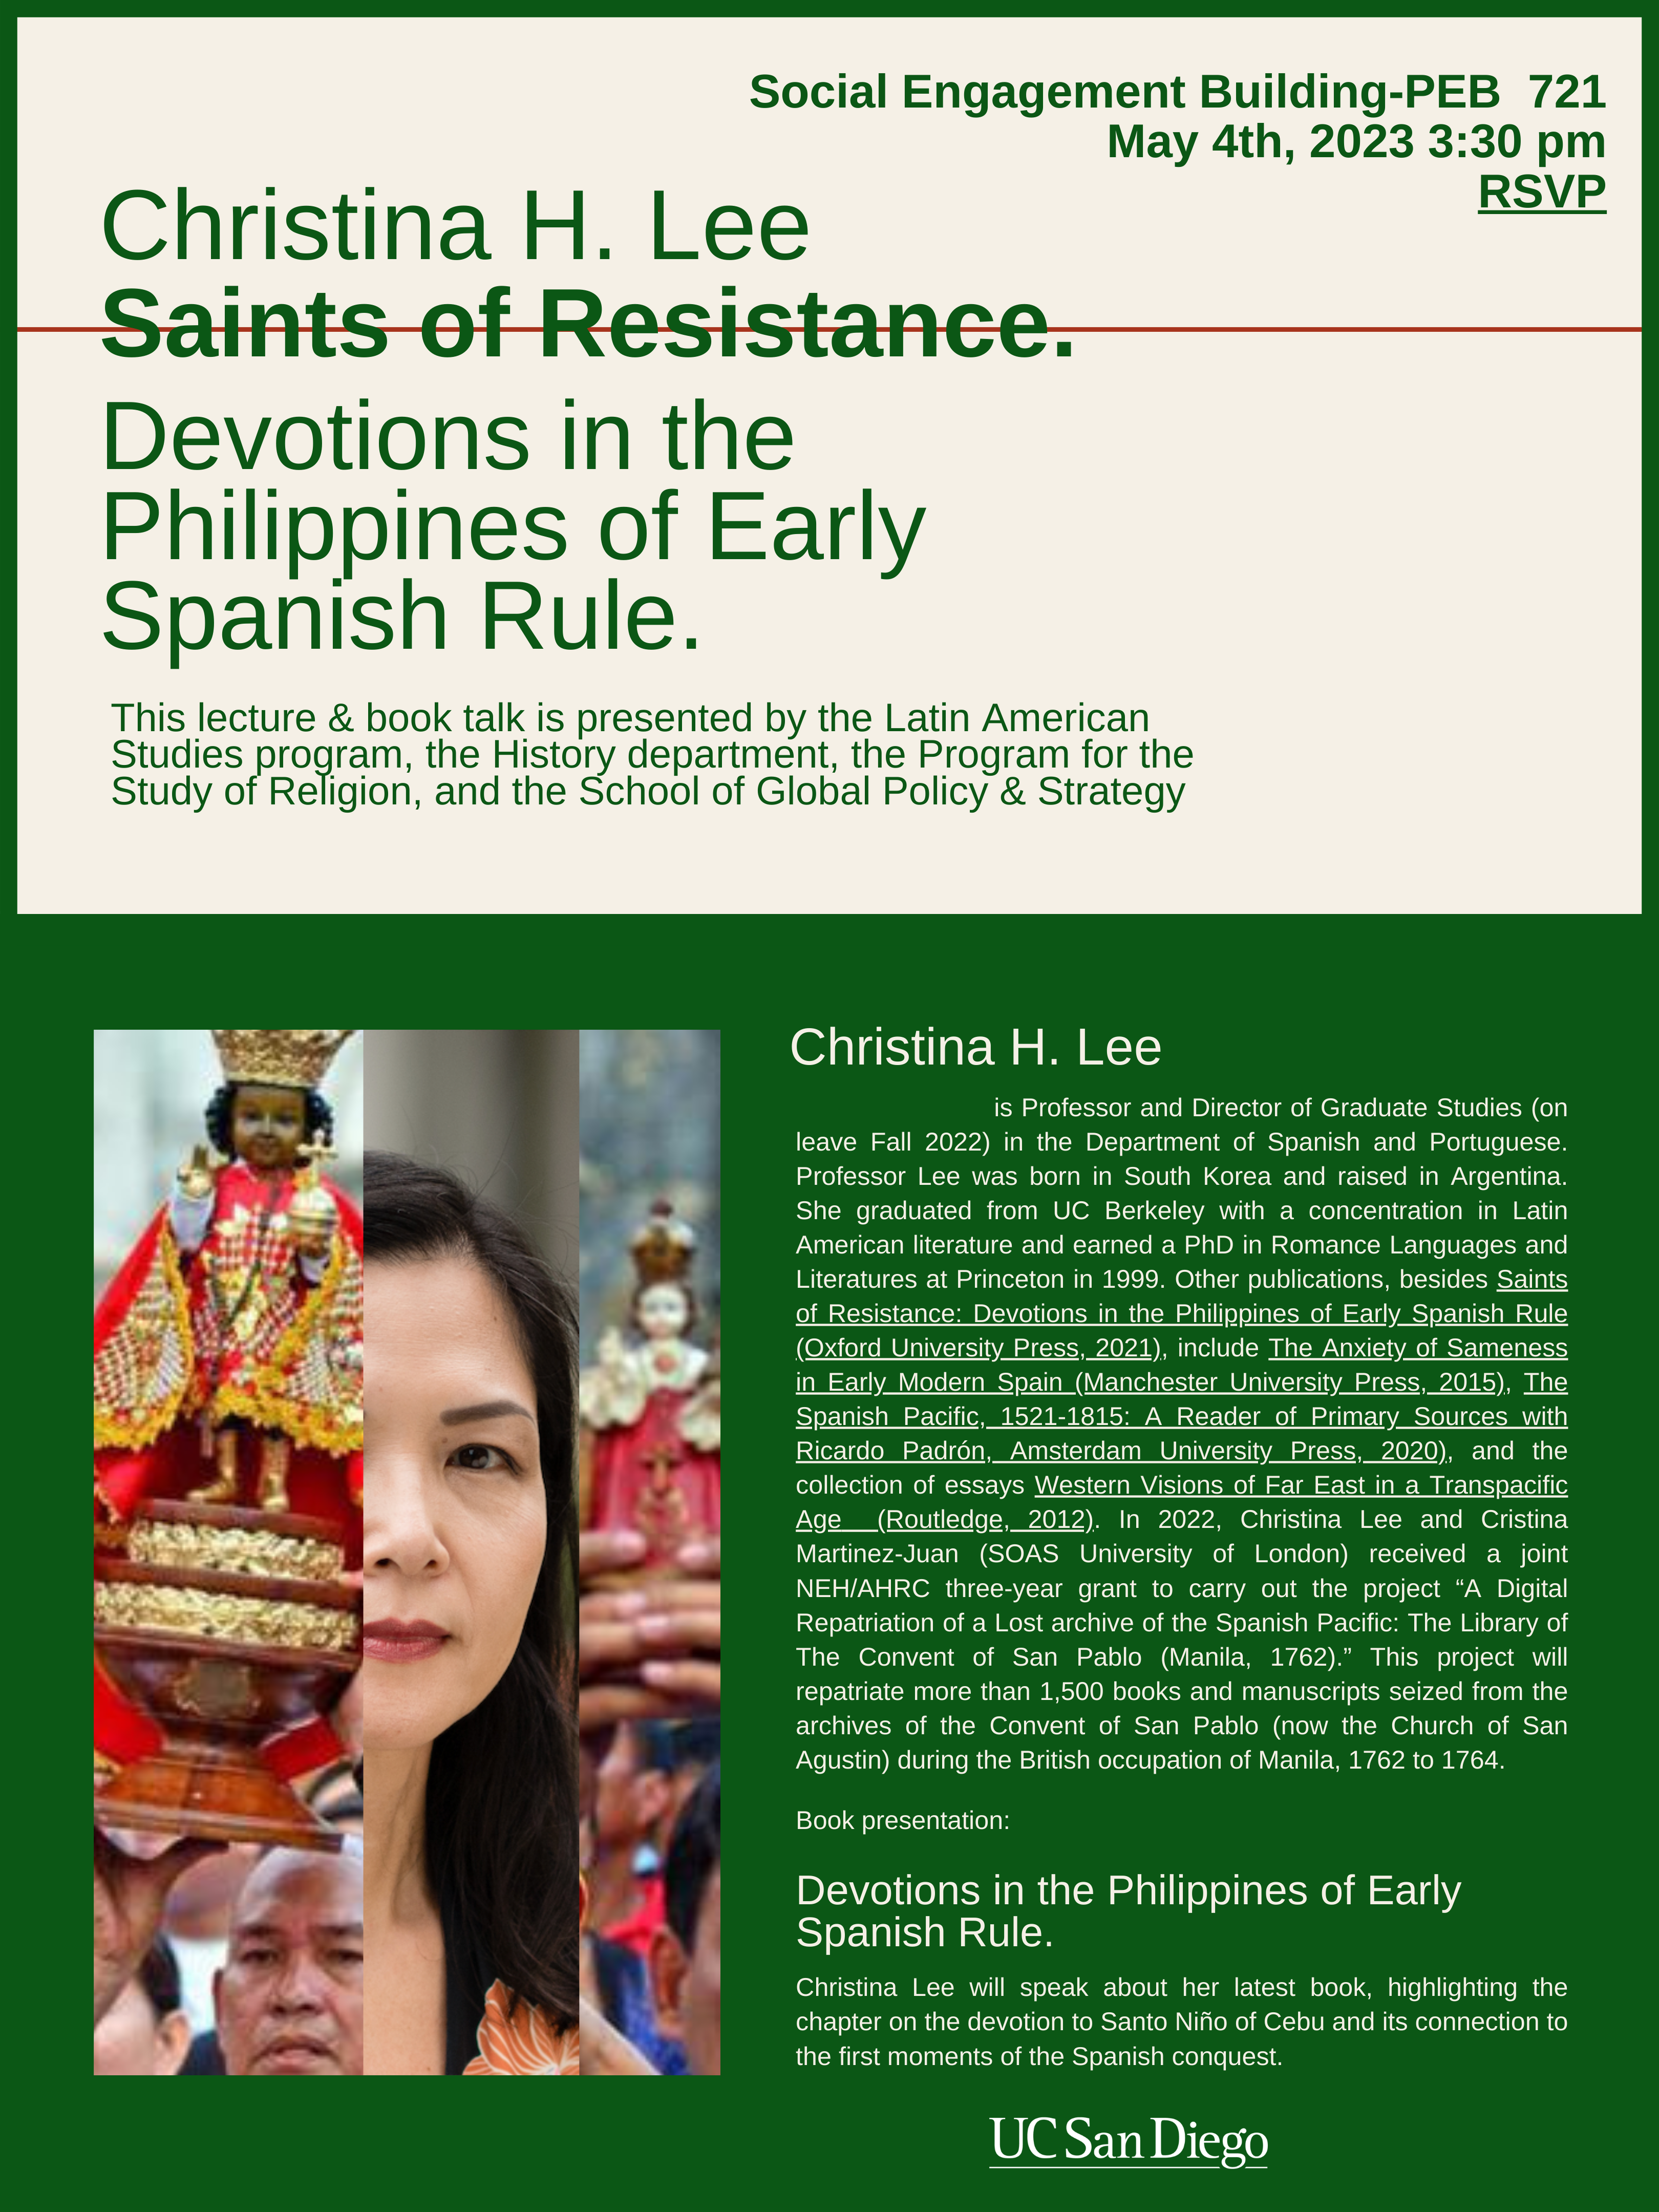 Christina-H.-Lee-Saints-of-Resistance-May-4th-2023.png